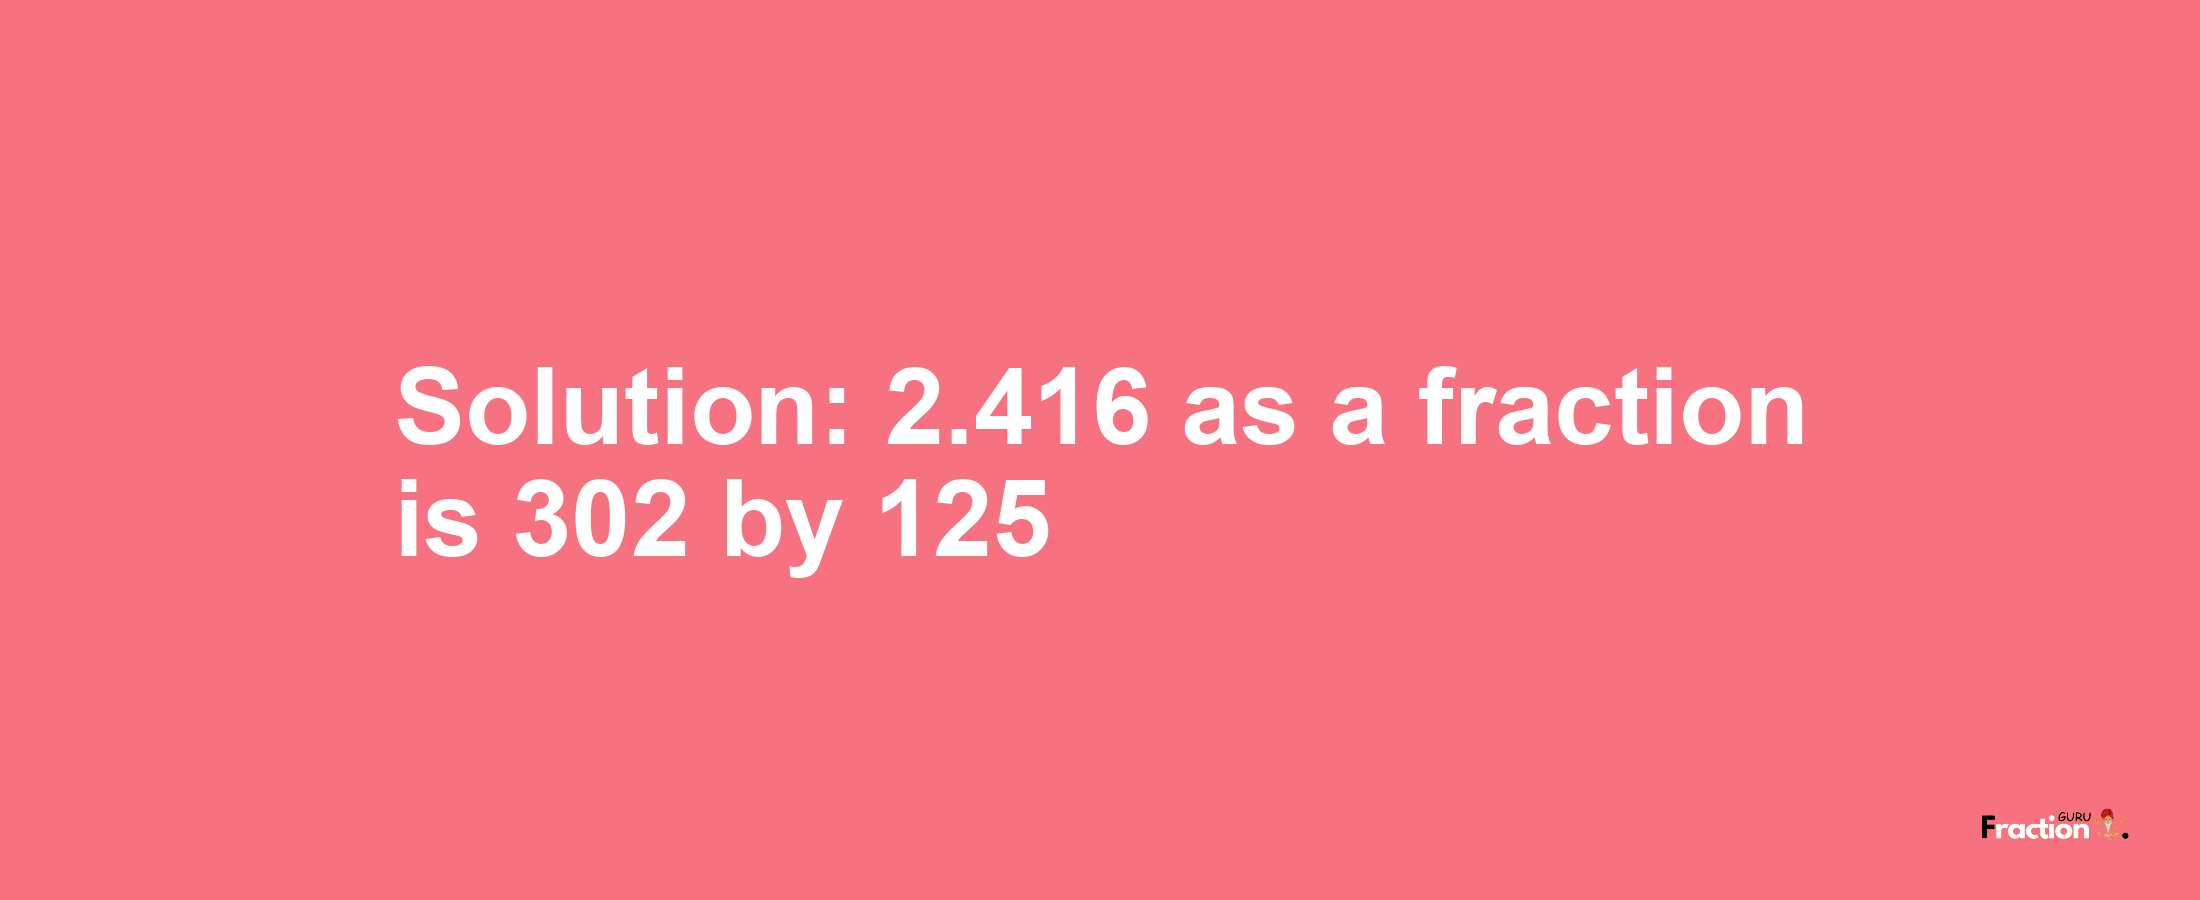 Solution:2.416 as a fraction is 302/125